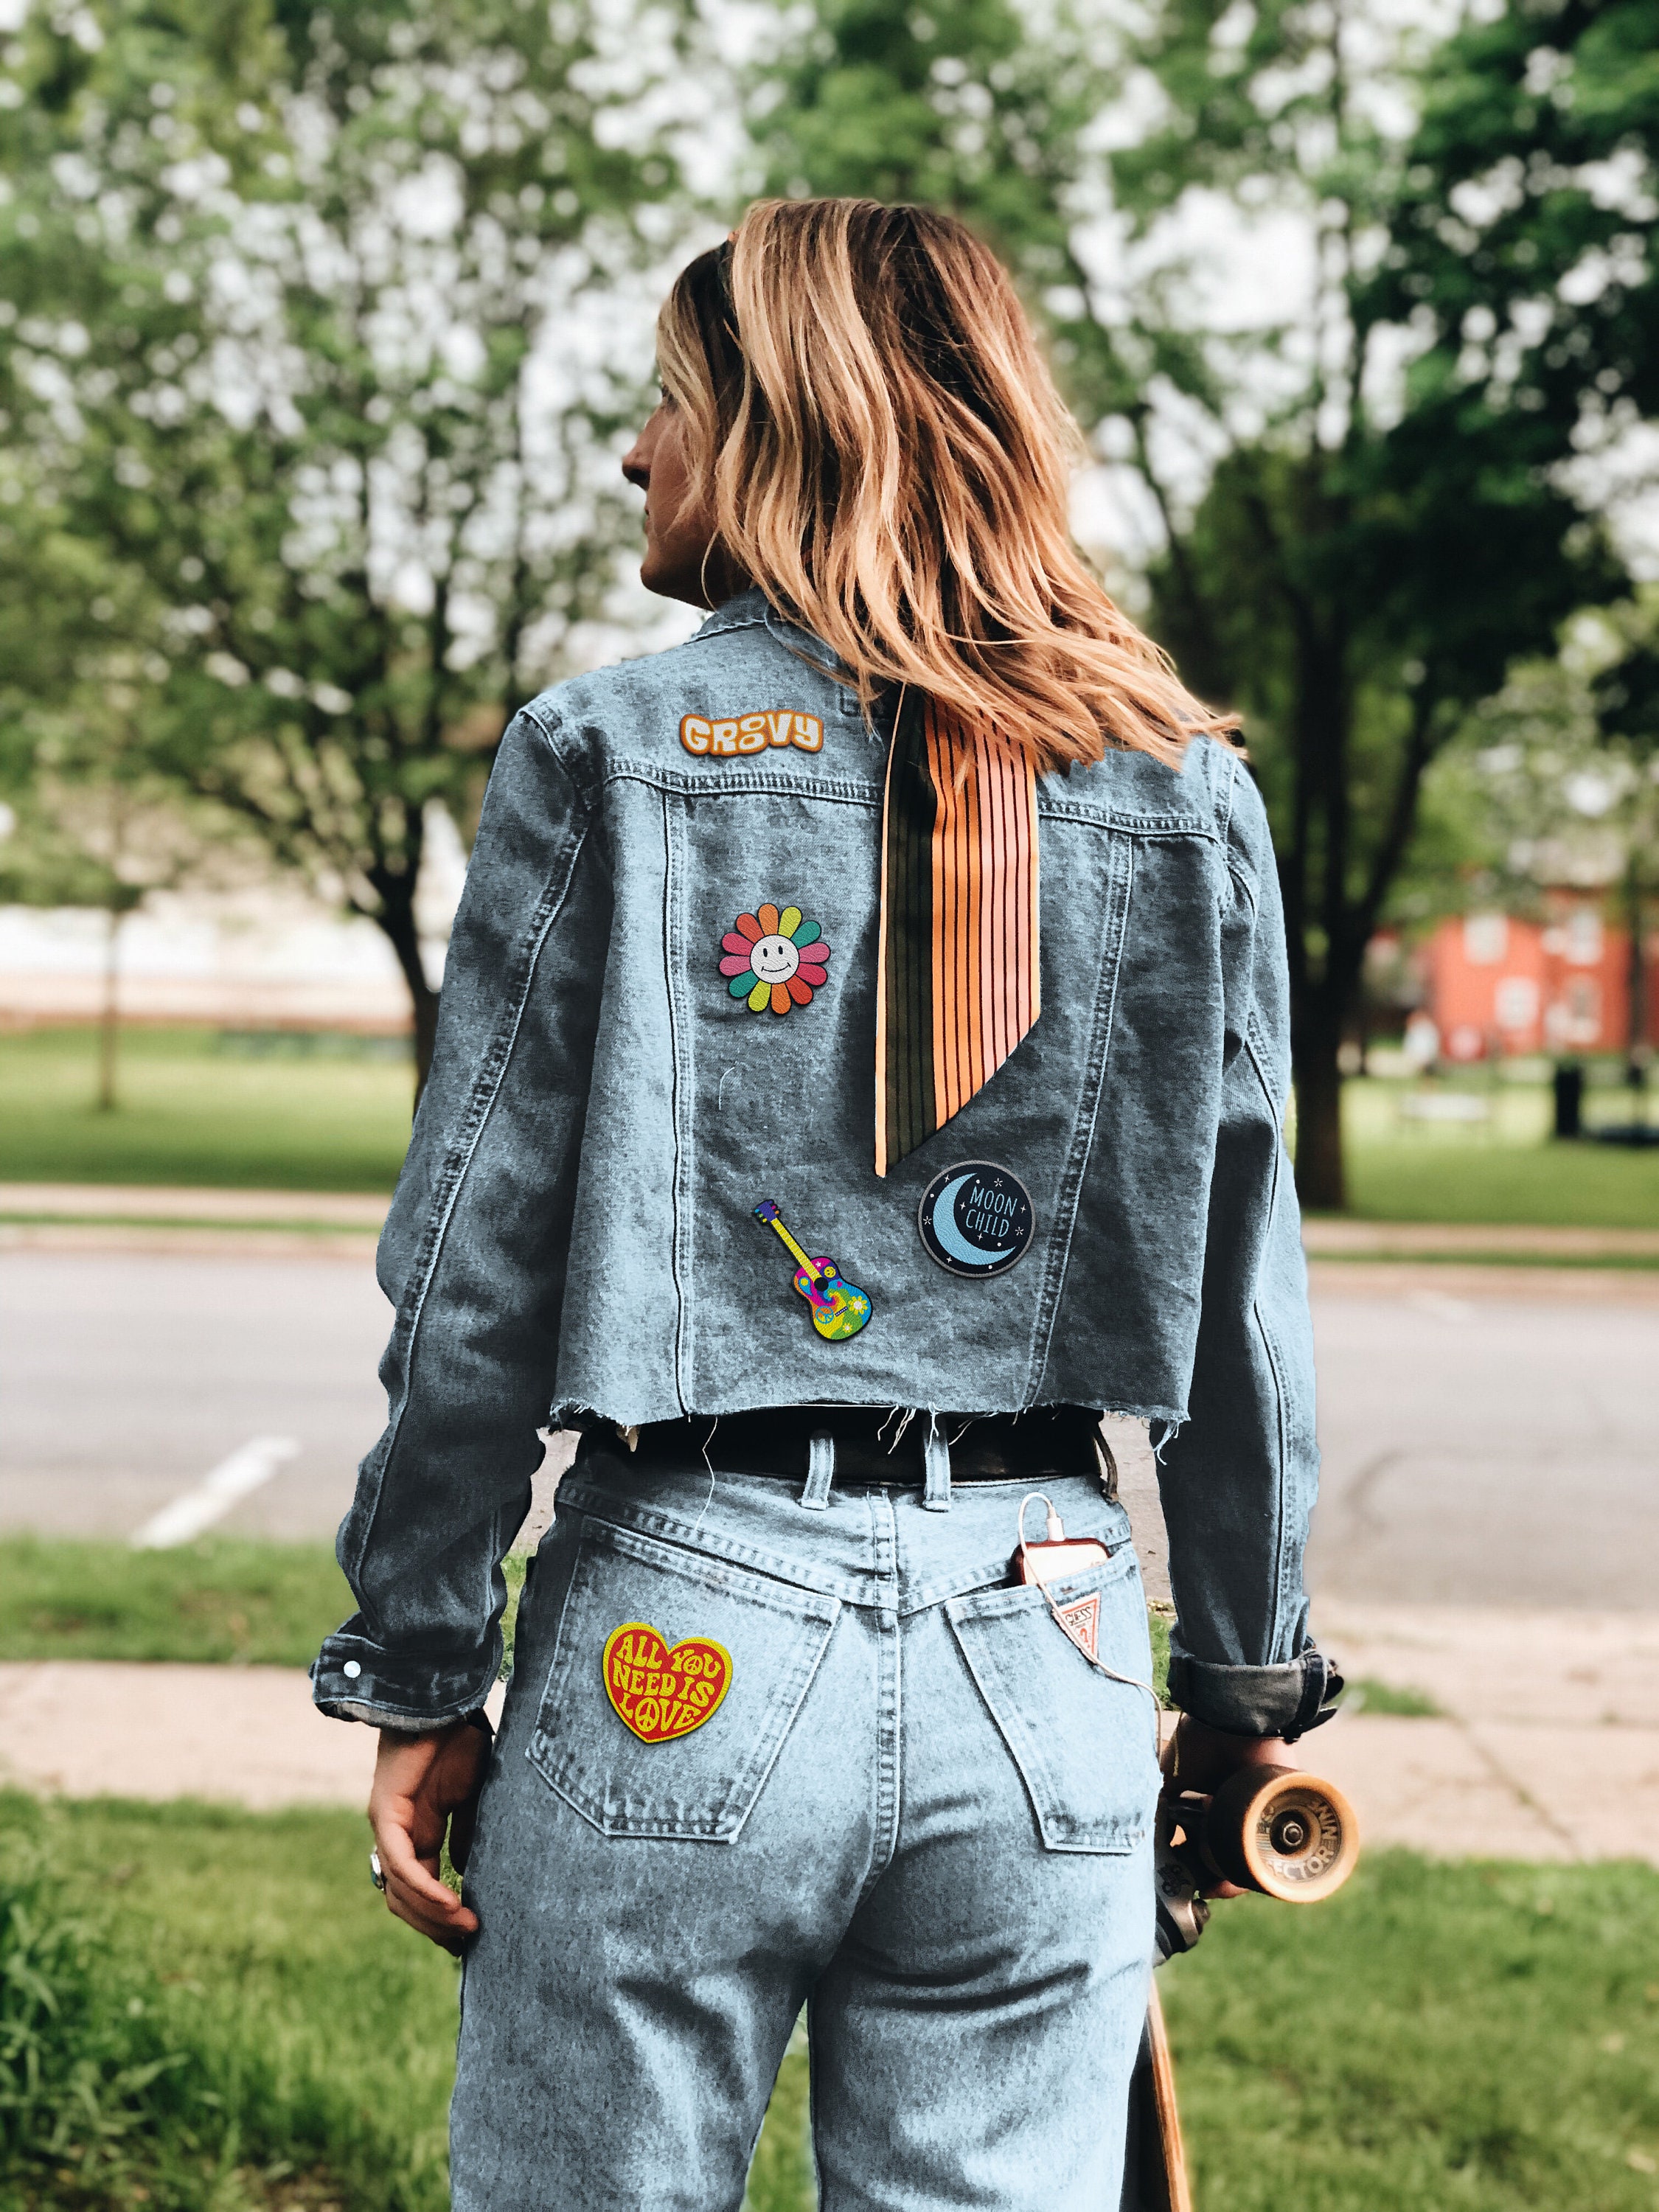  12 Iron on Preppy Patches - The Carefree Bee